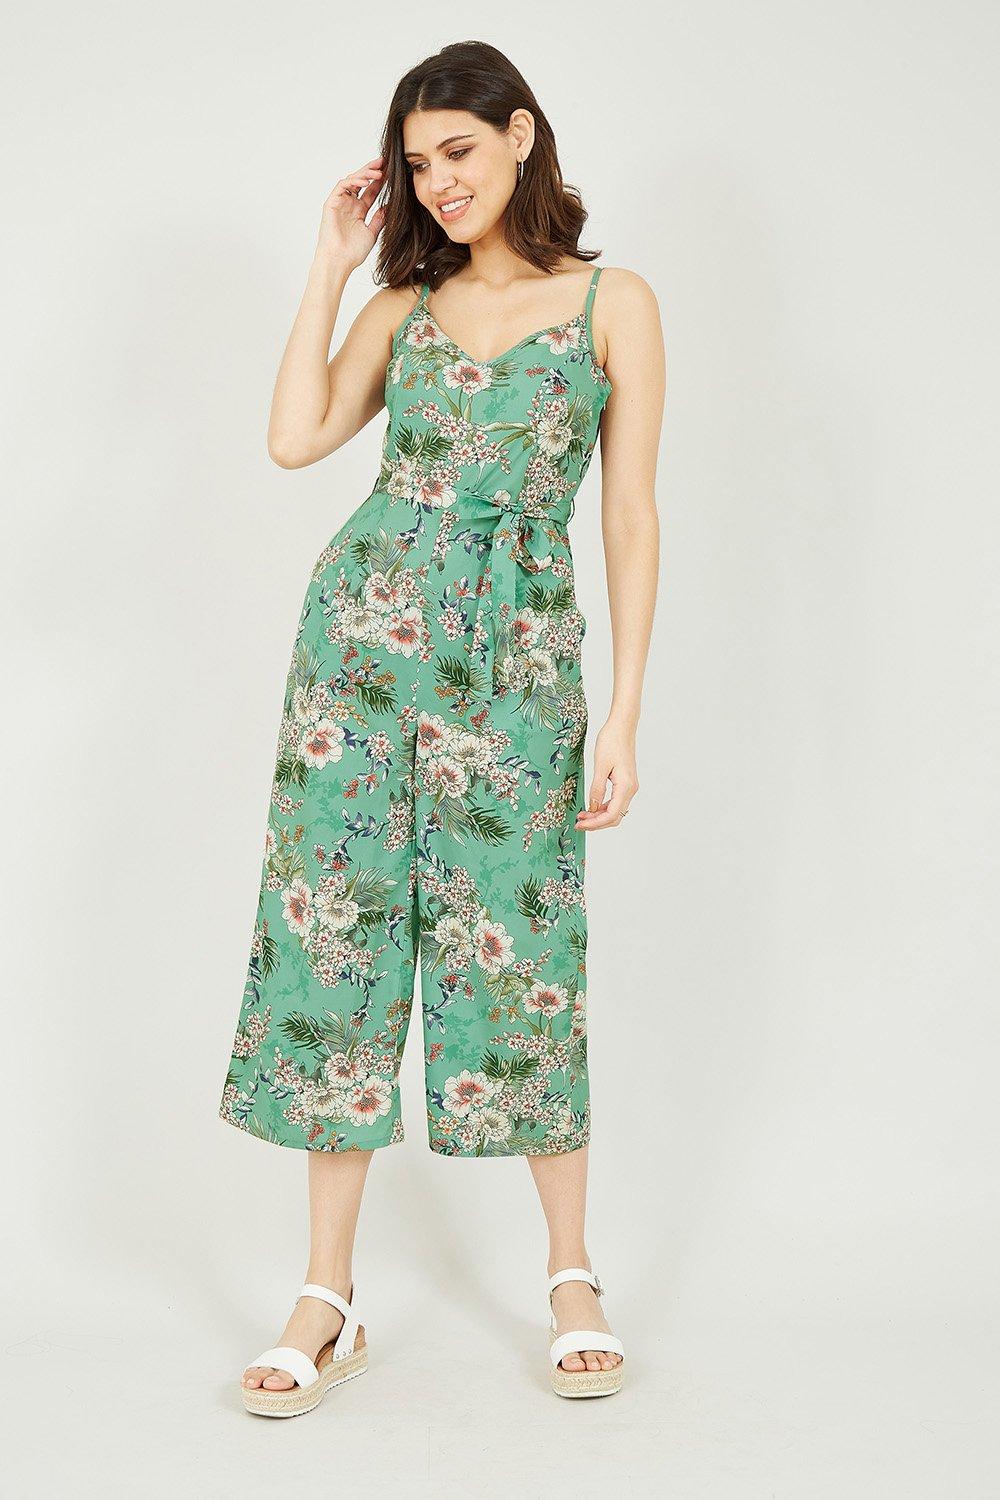 Floral jumpsuit dorothy perkins, Women's Fashion, Dresses & Sets, Jumpsuits  on Carousell